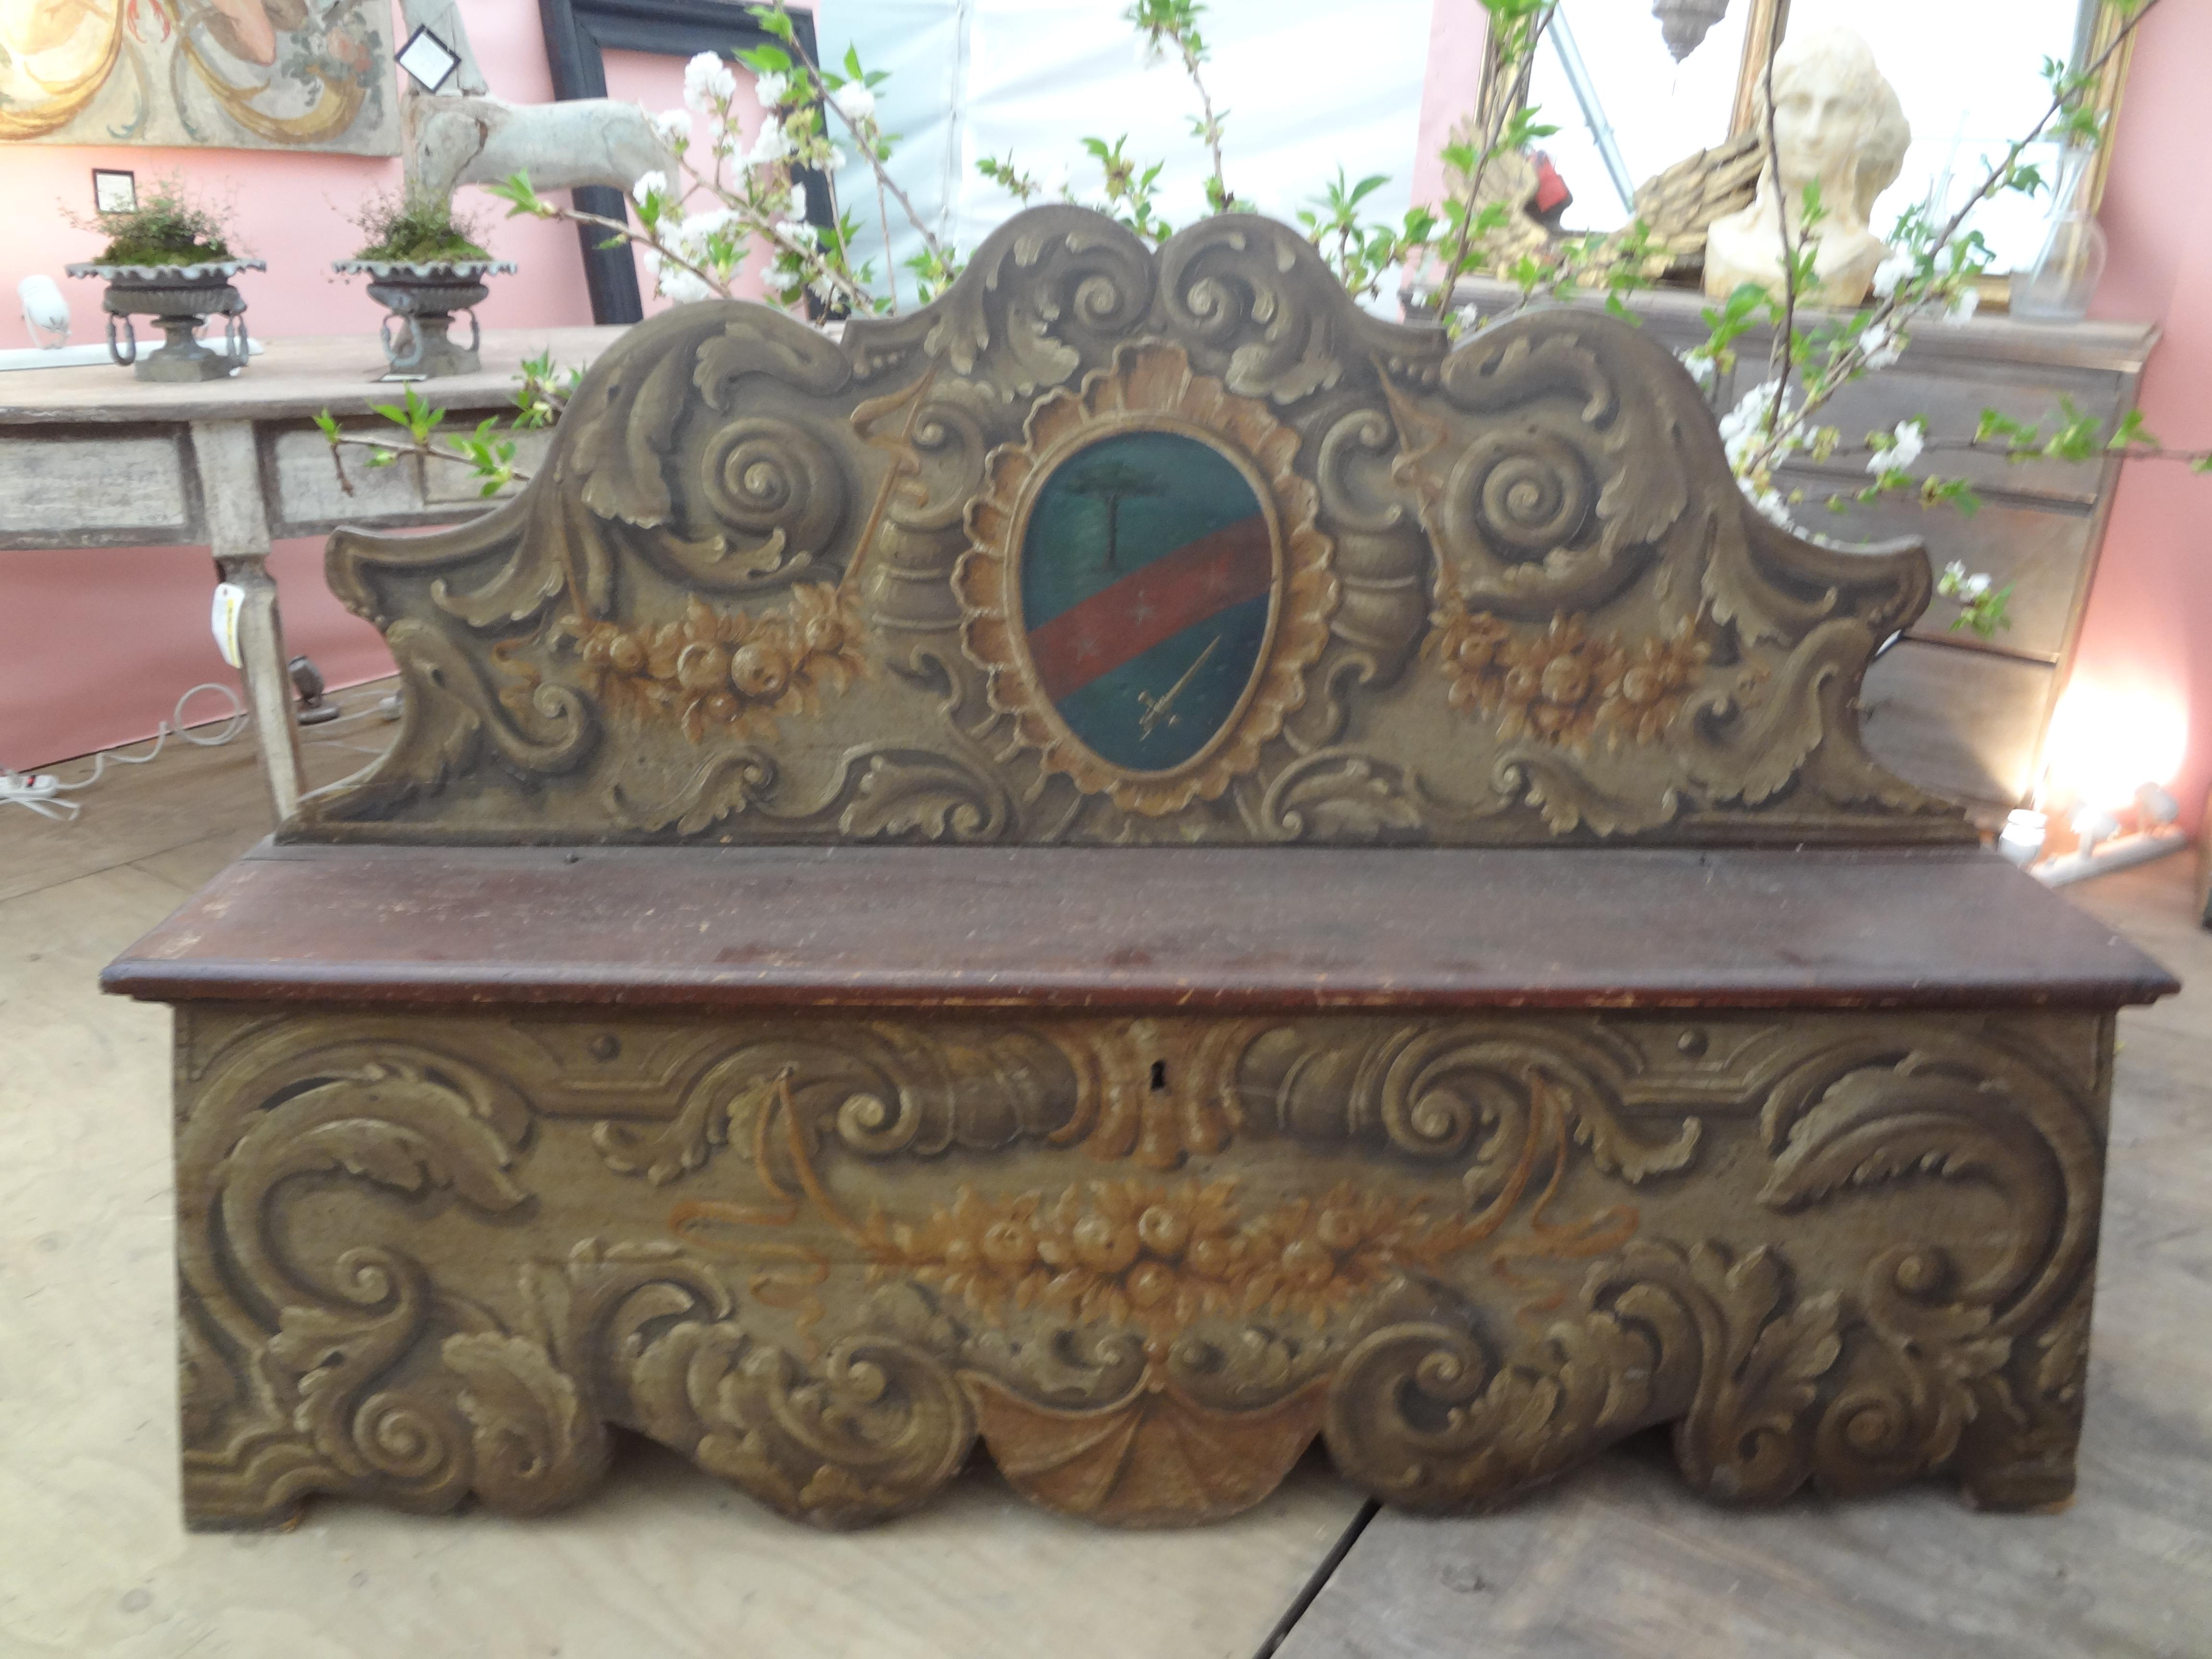 17th century Tuscan cassapanca Or Bench With A Family Crest.
Stunning 17th century Tuscan cassapanca or hand decorated bench with a family crest. This lovely bench or hall bench has a lid that lifts with storage inside. Our Italian painted bench